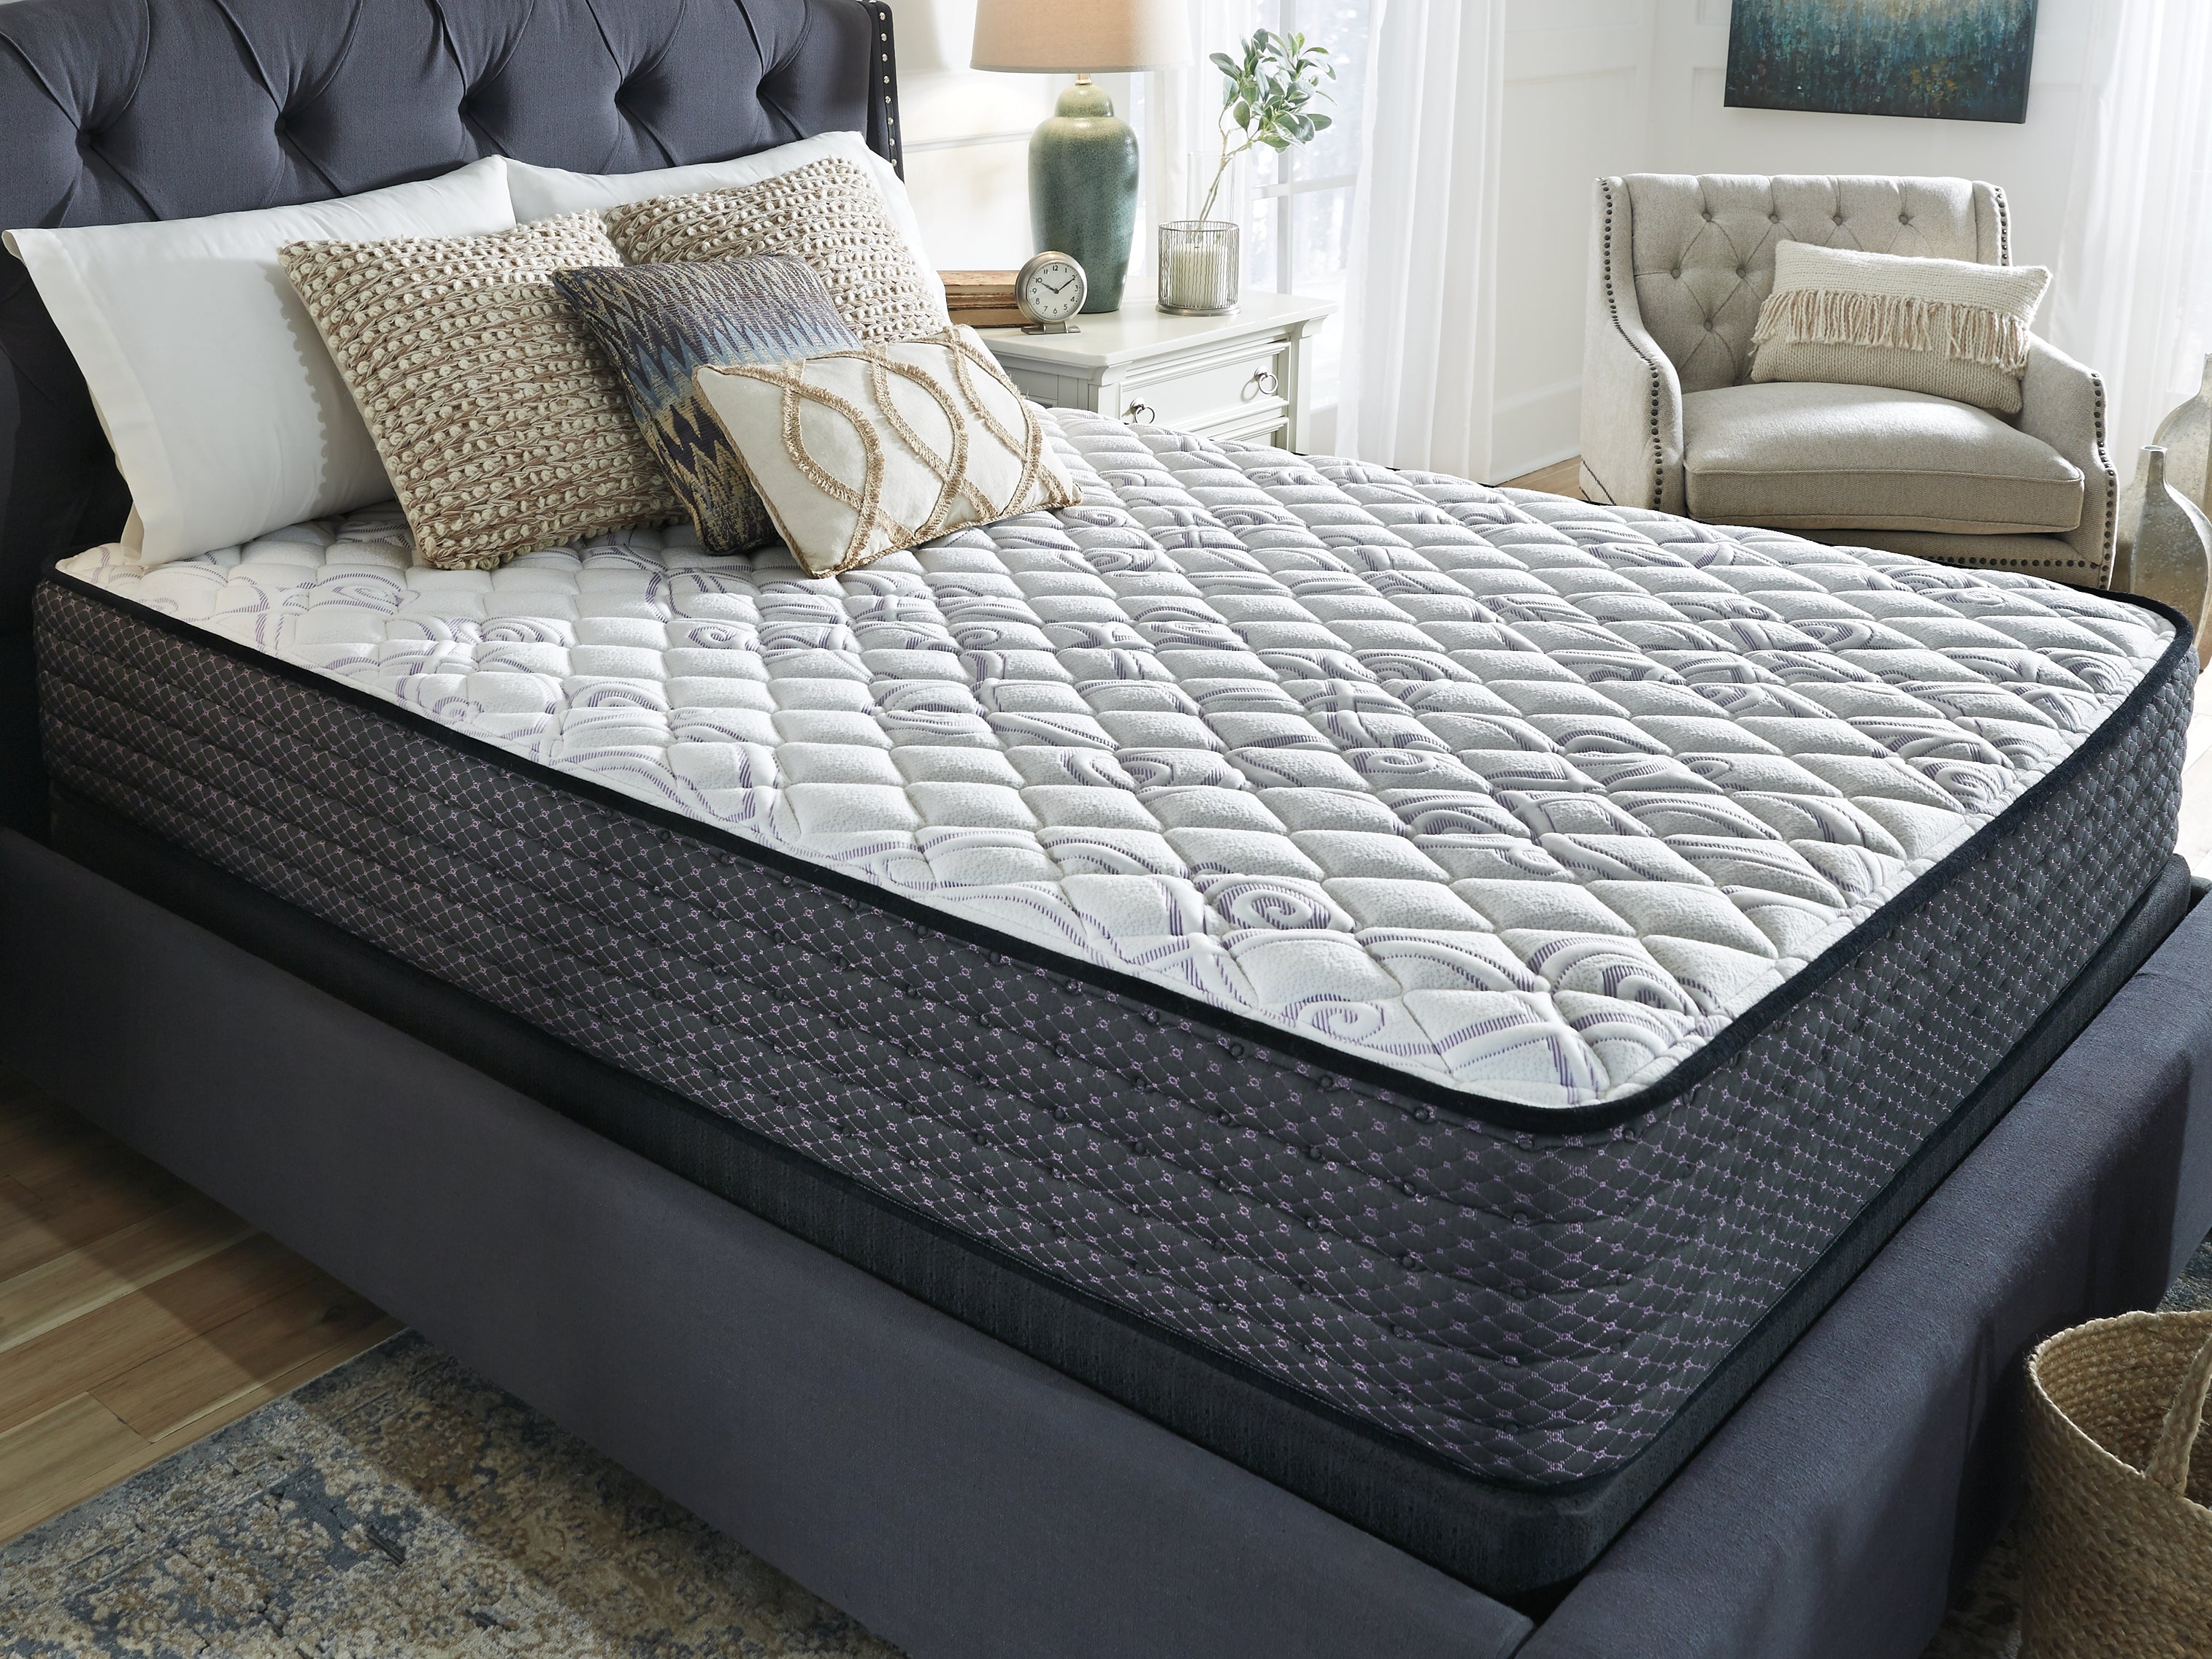 Limited Edition Firm Twin Xtra Long Mattress with Head-Foot Model Better Split King Adjustable Base - furniture place usa